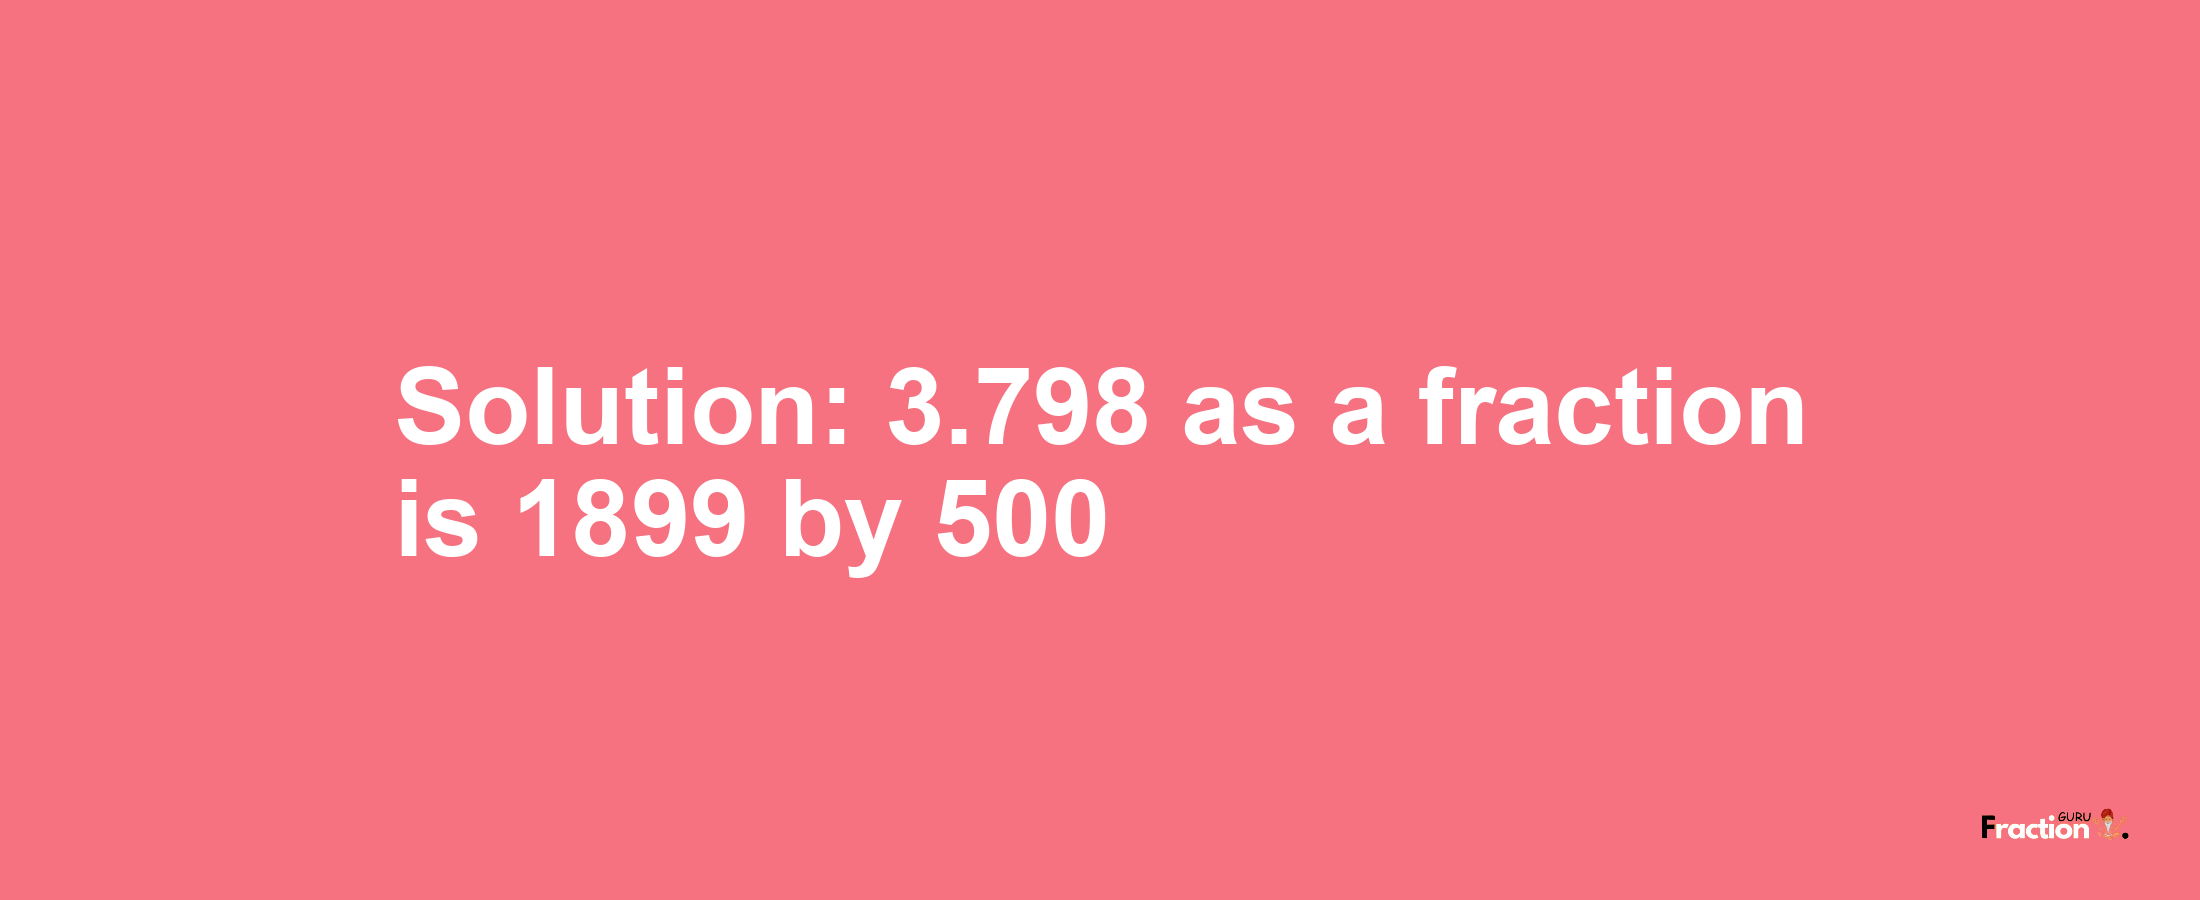 Solution:3.798 as a fraction is 1899/500